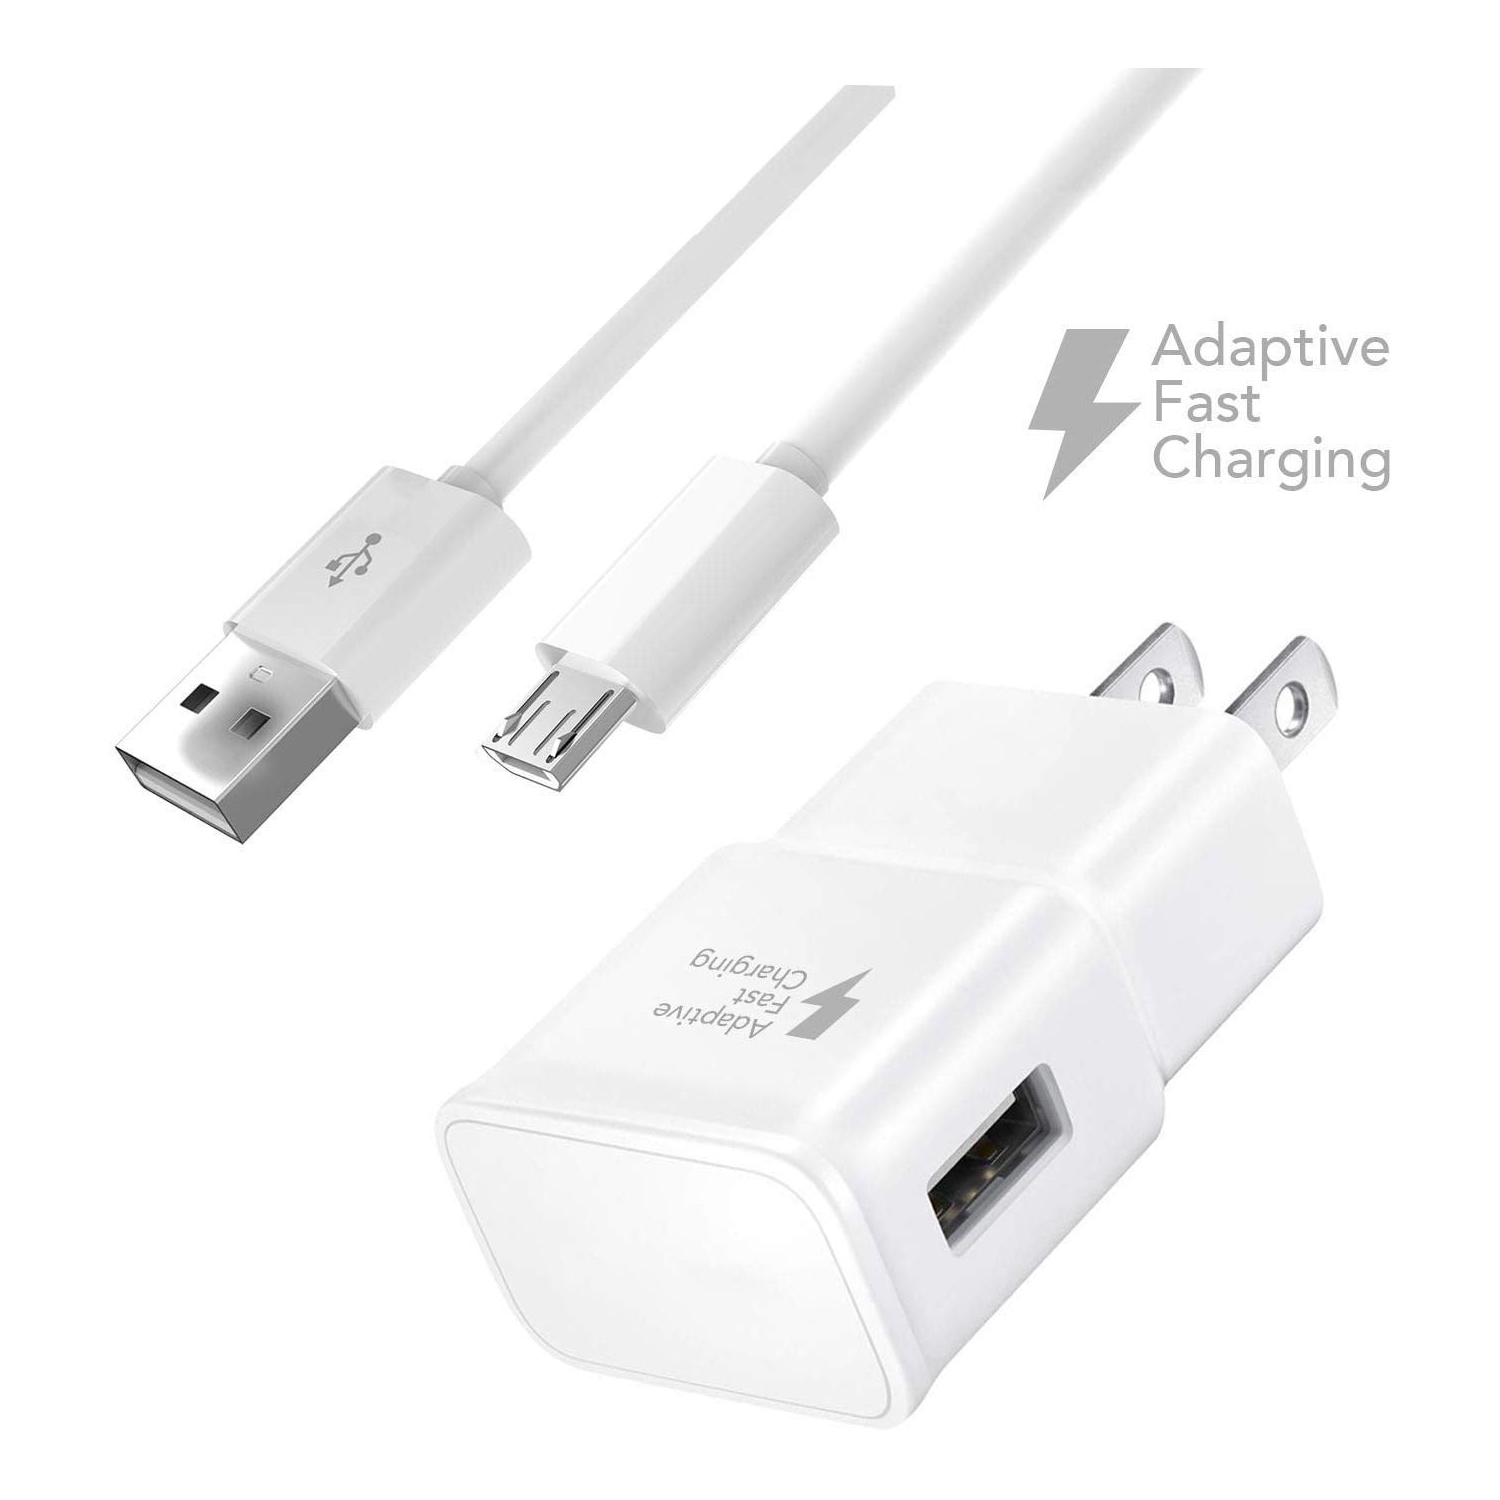 (CABLESHARK) For Samsung Compatible Galaxy J3 (2016) Adaptive Fast Charger Micro USB 2.0 Cable Kit!